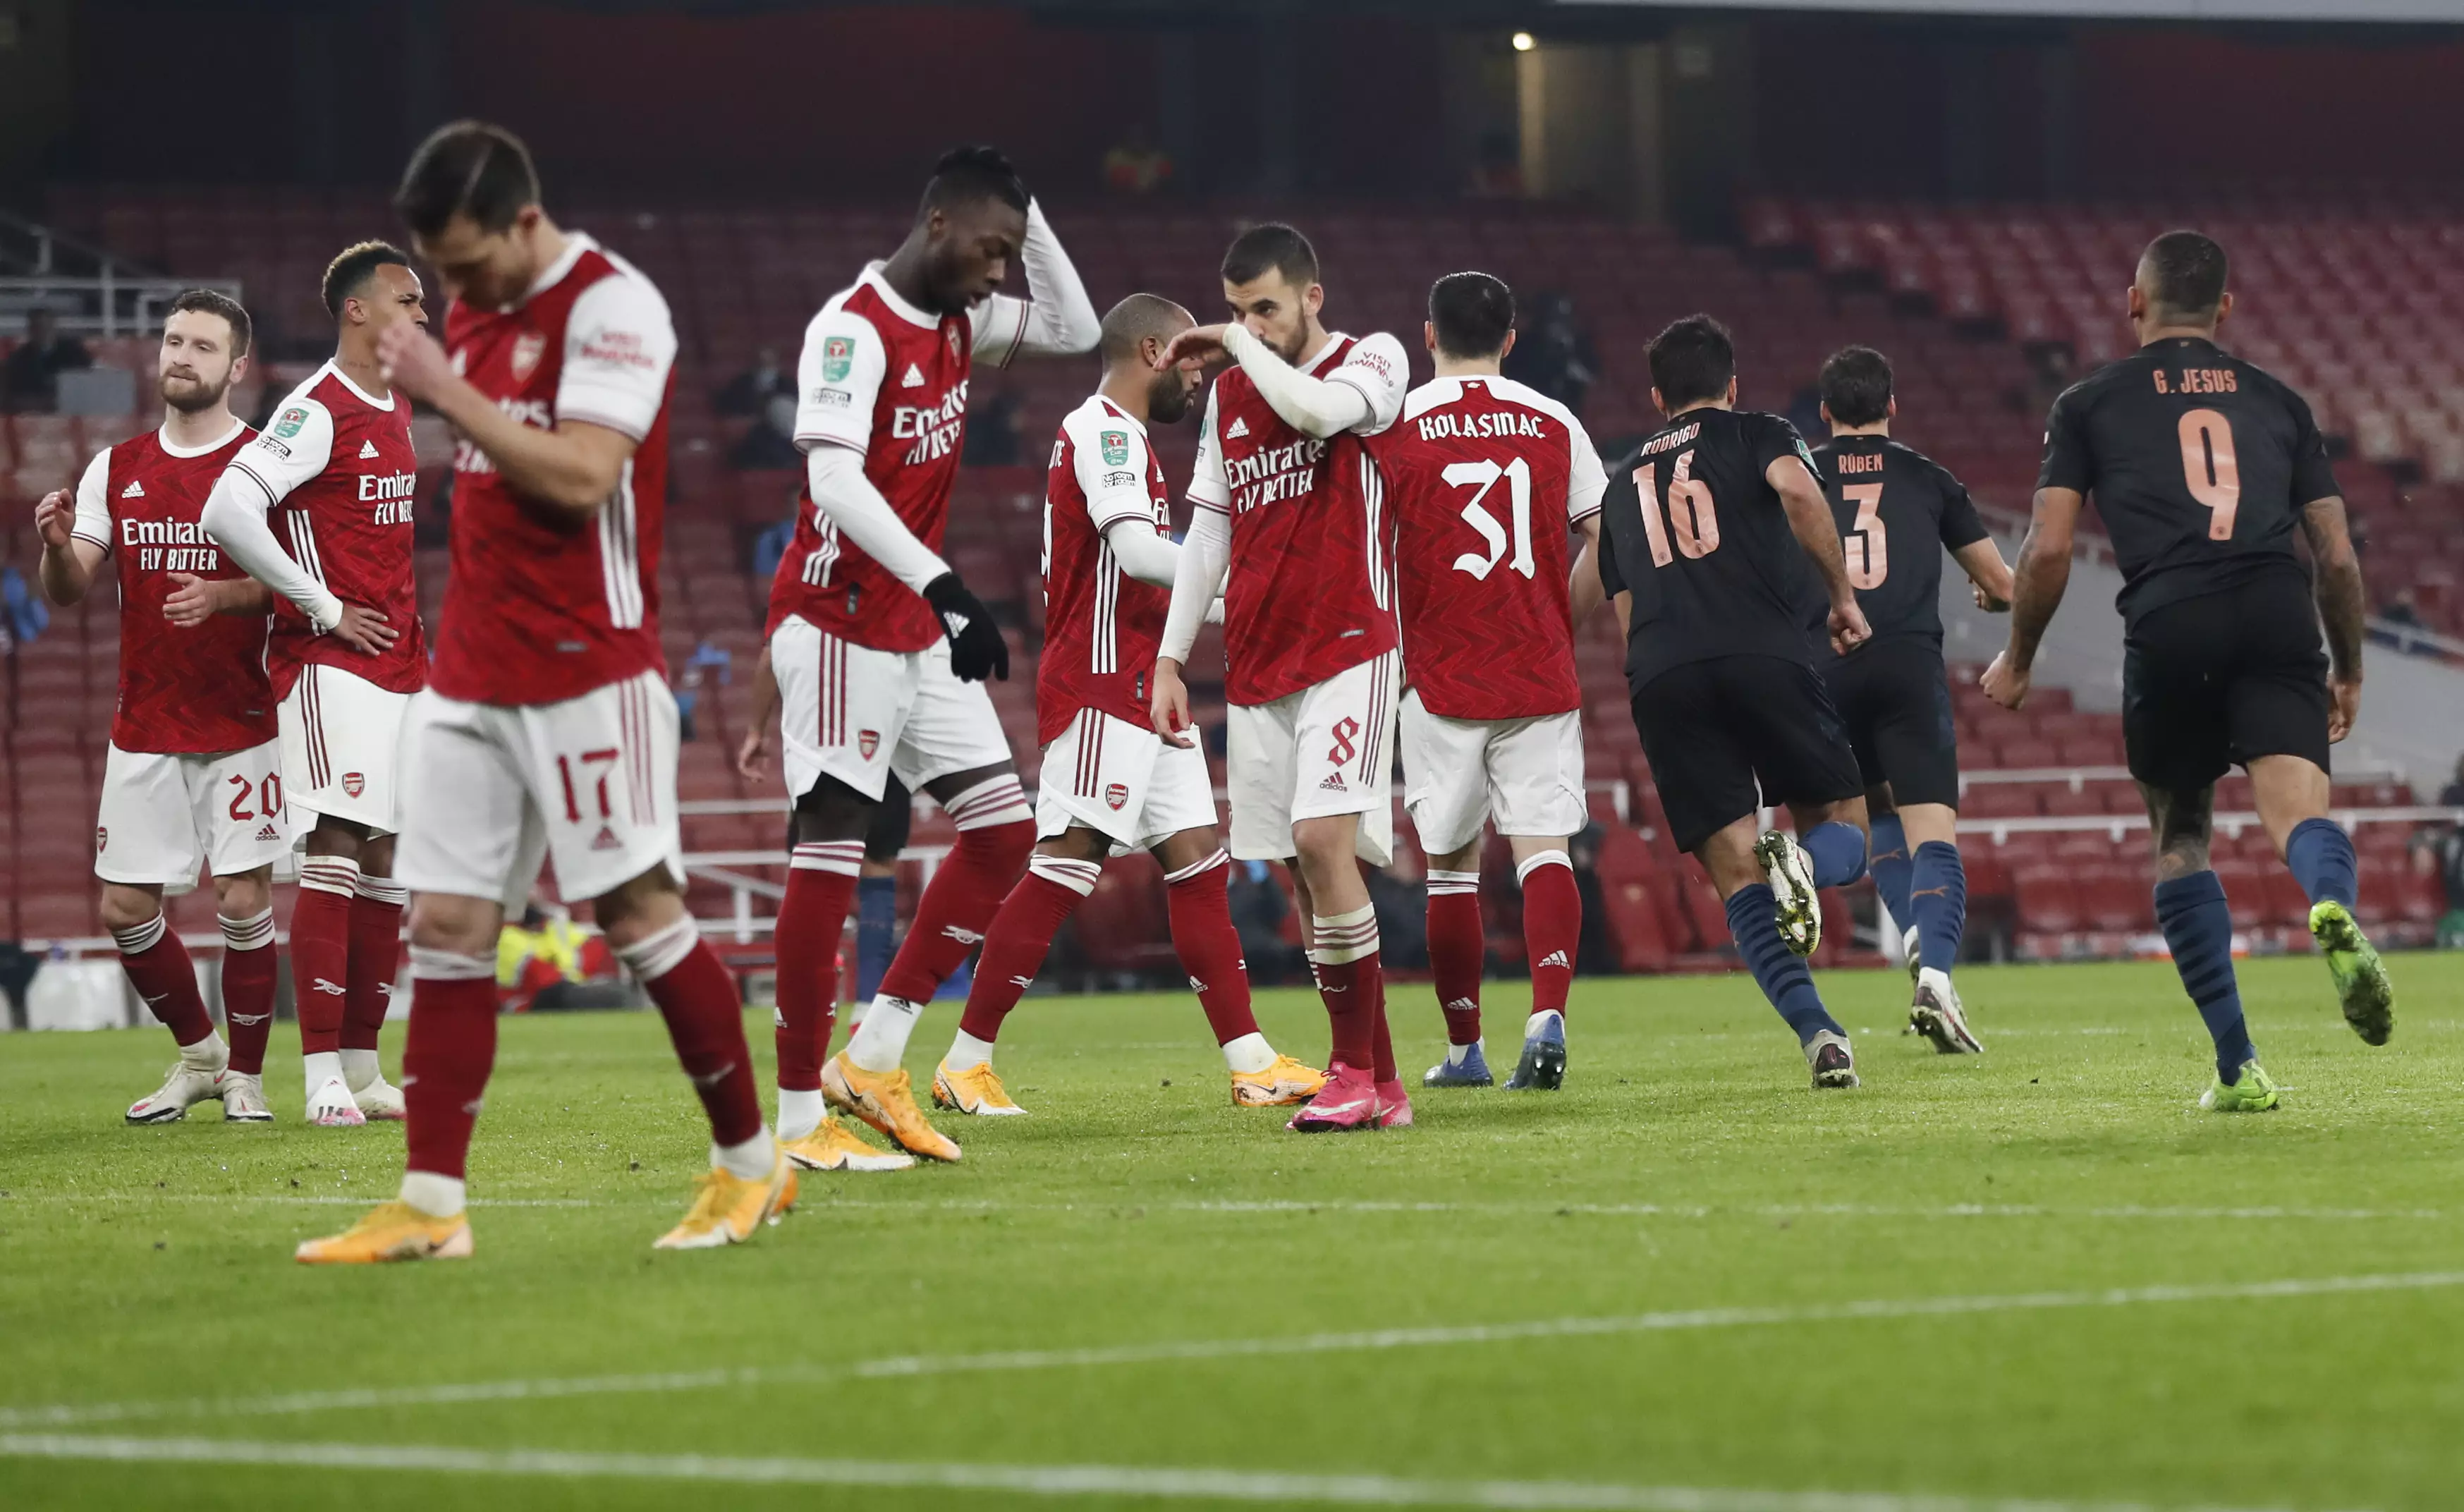 Arsenal players look dejected after conceding against City. Image: PA Images